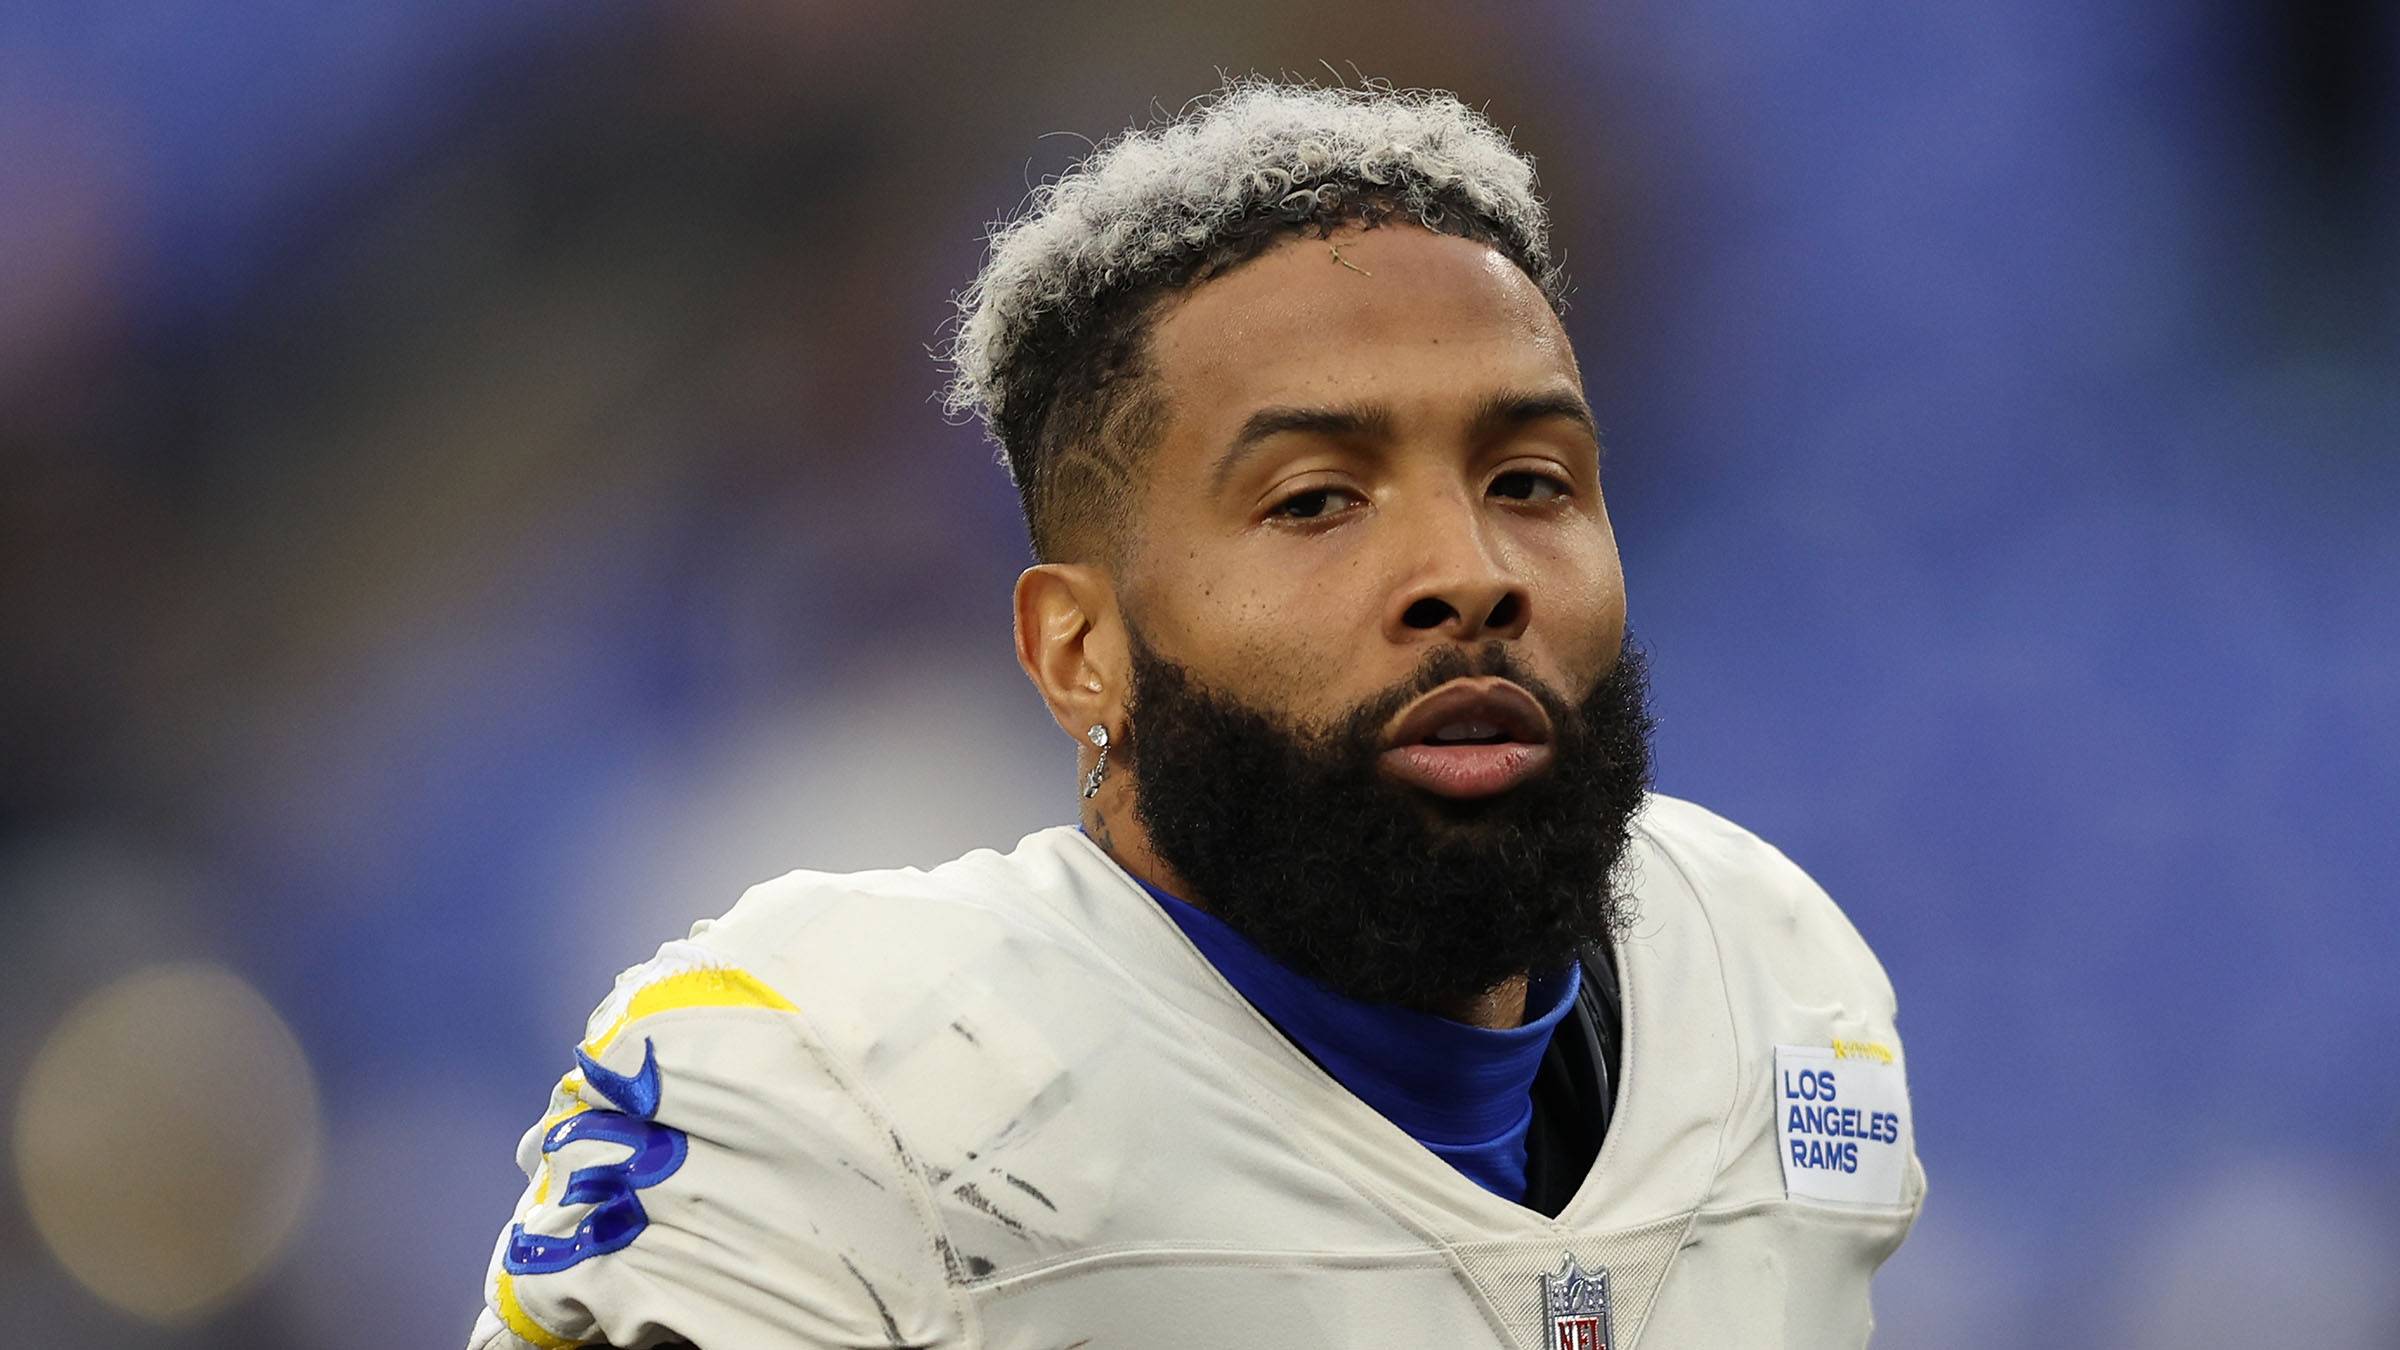 Jerry Jones Says Odell Beckham Jr. 'Could Look Pretty Good' With A